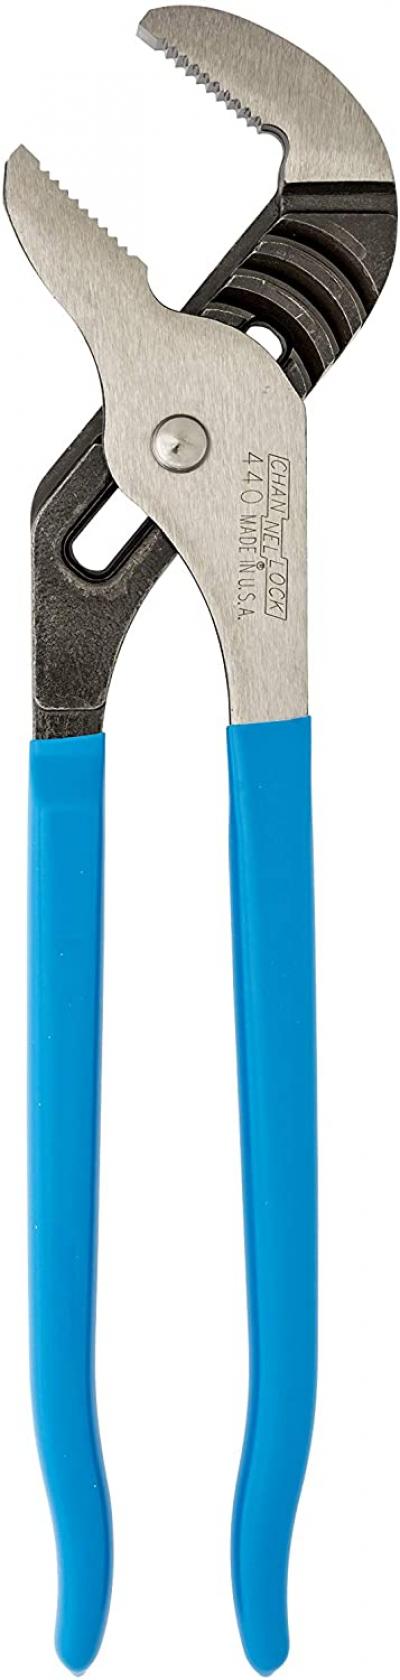 Channellock 12-Inch Carbon Steel Tongue & Groove Pliers